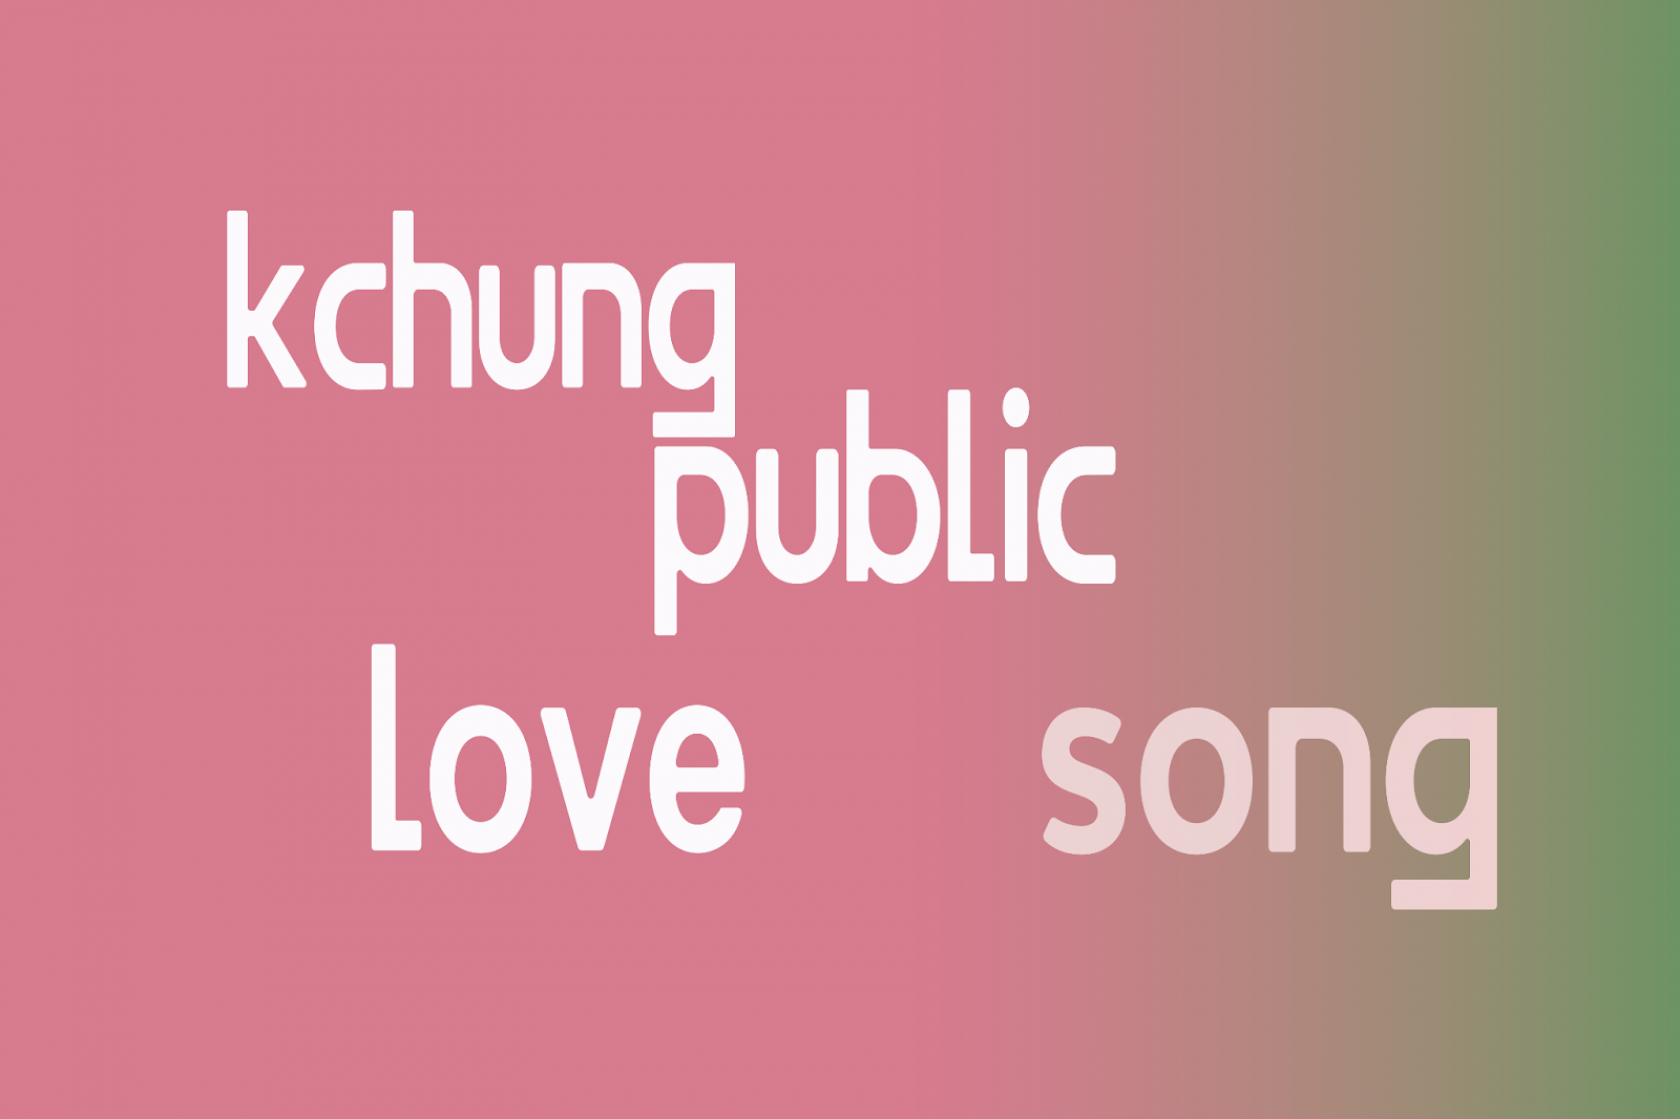 KCHUNG Public: Love Song with Chief Adjuah formerly Christian Scott and Wyldeflower